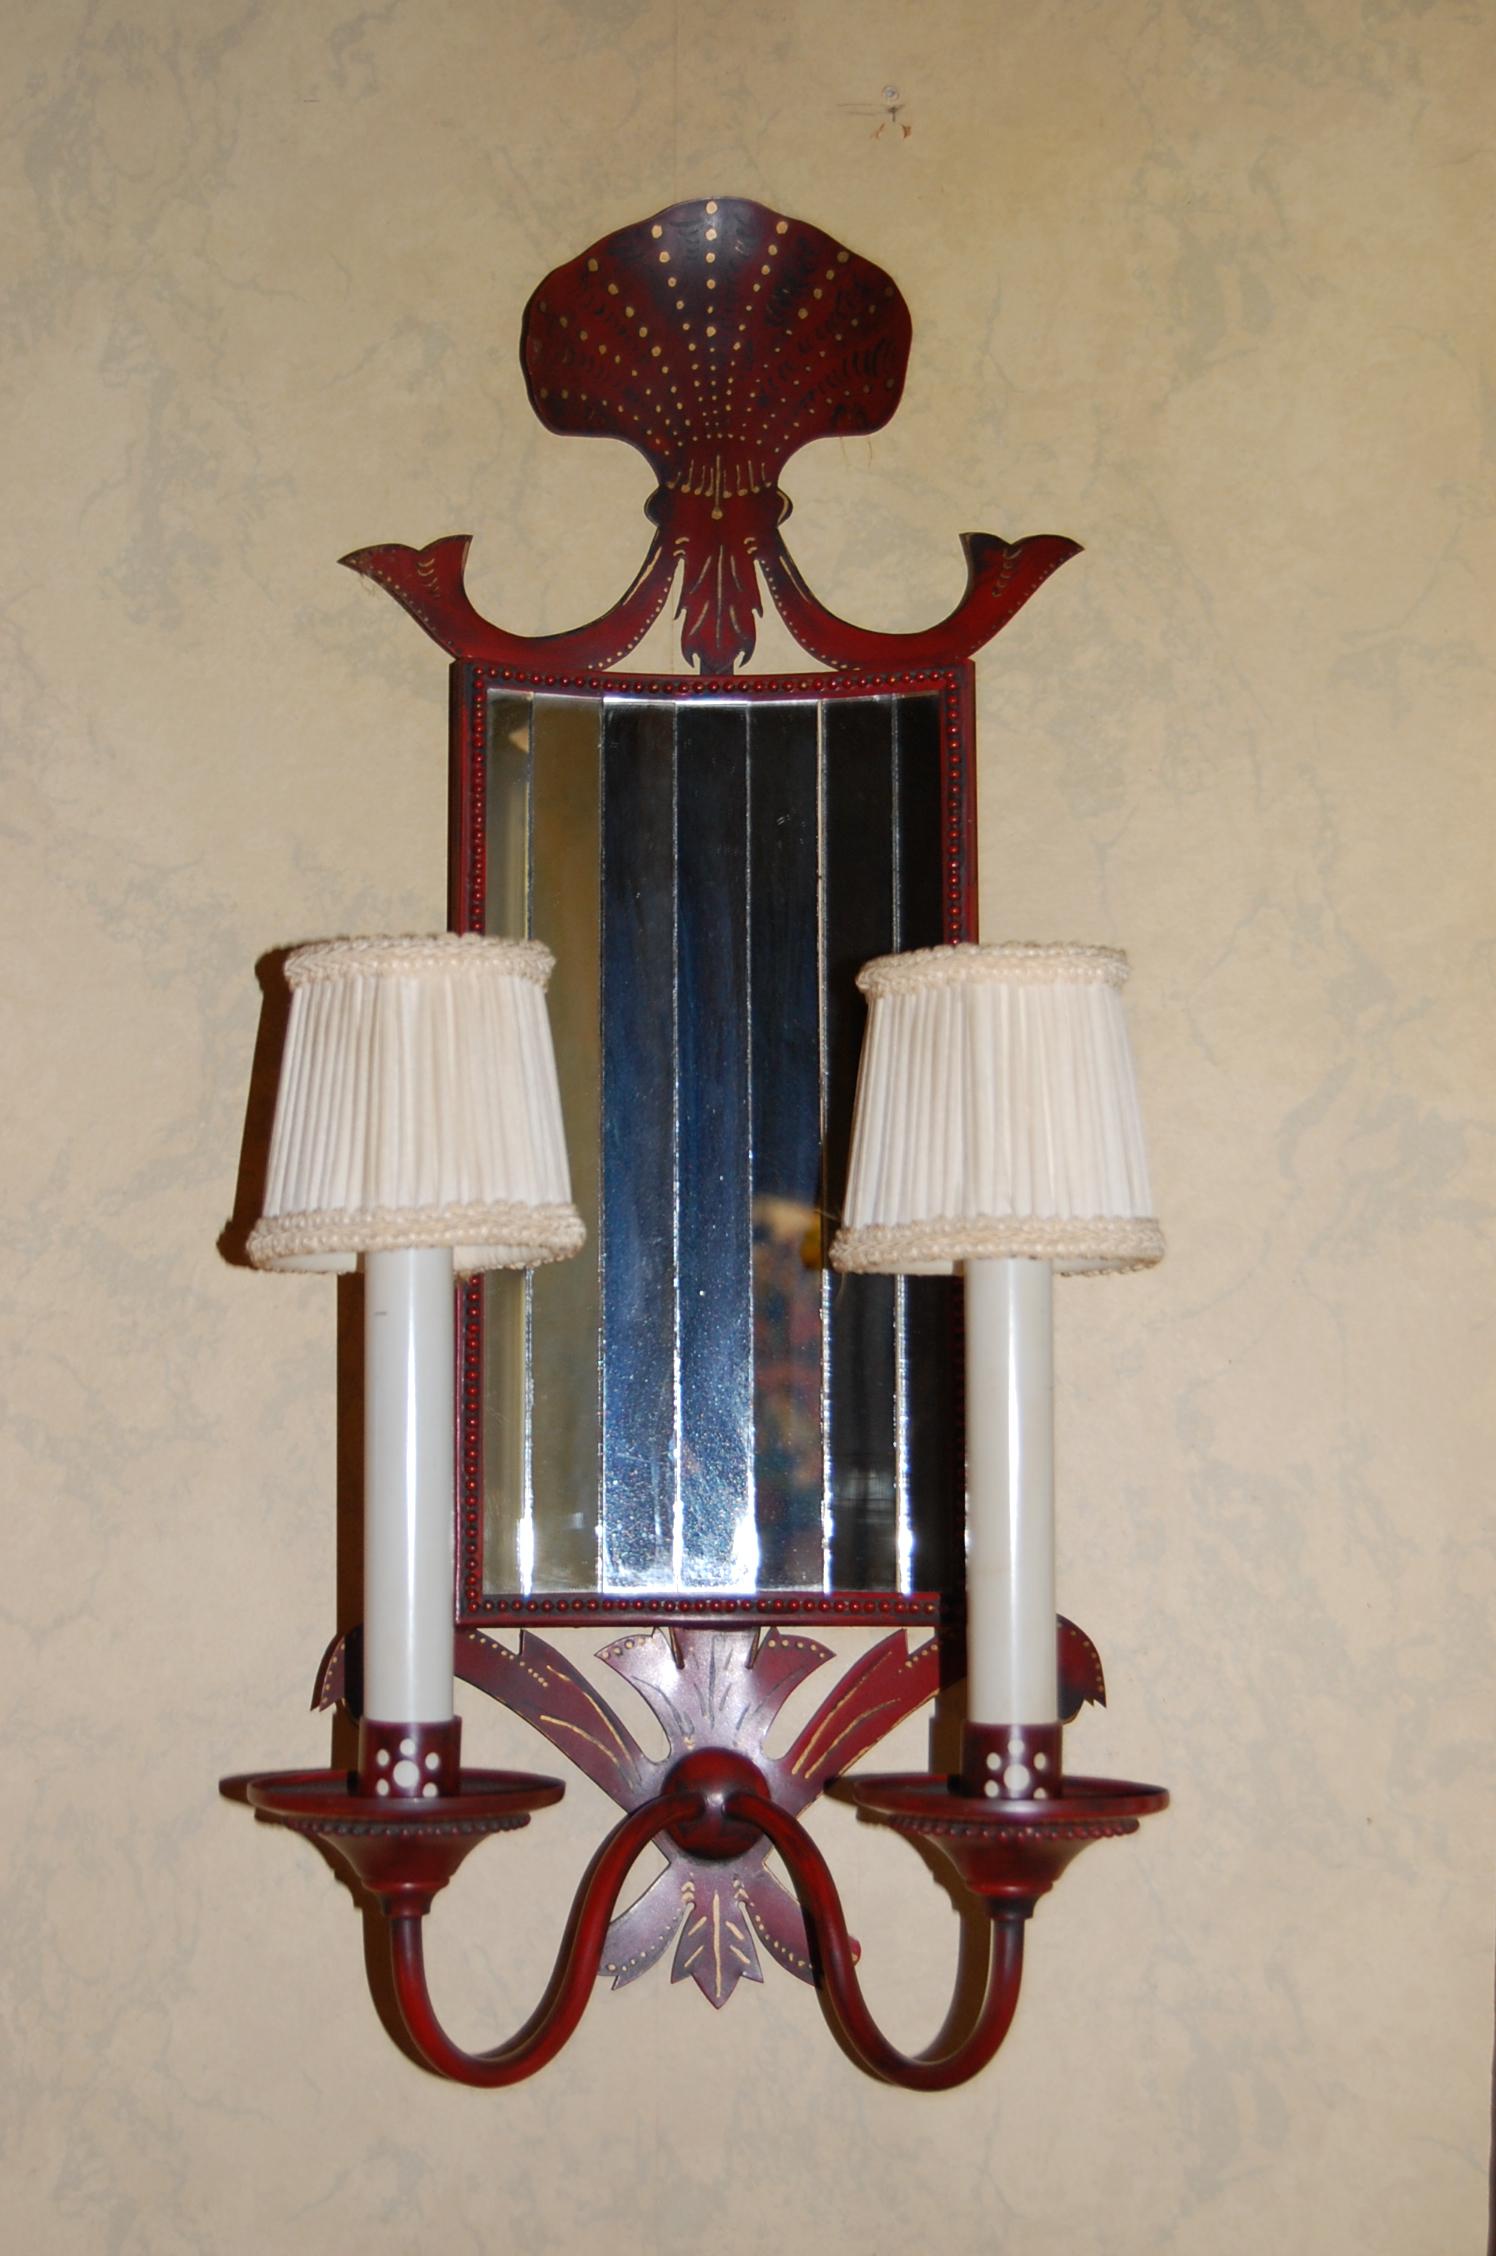 Pair of red painted and decorated tole sconces with narrow pieces of mirror set into the curved back plate in original painted finish, circa 1900. A shaped Scallop shell sits atop the back plate and is nicely detailed using paint. This pair of